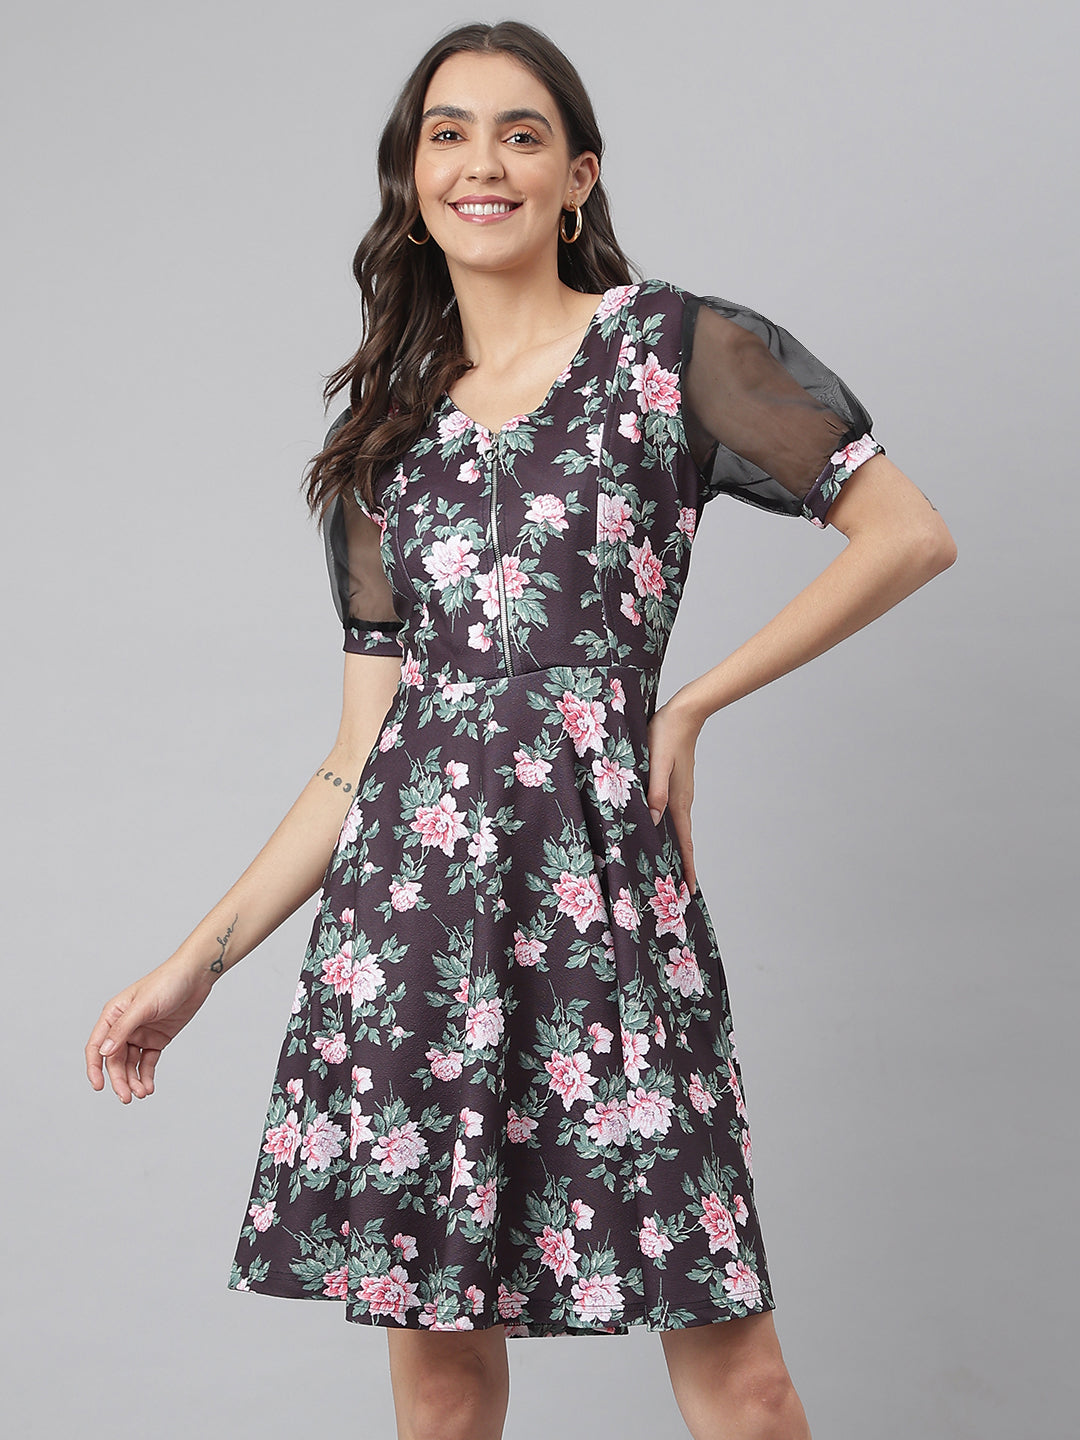 Black Poly Blend Lycra Fabric Floral Printed Dress With Organza Sleeves